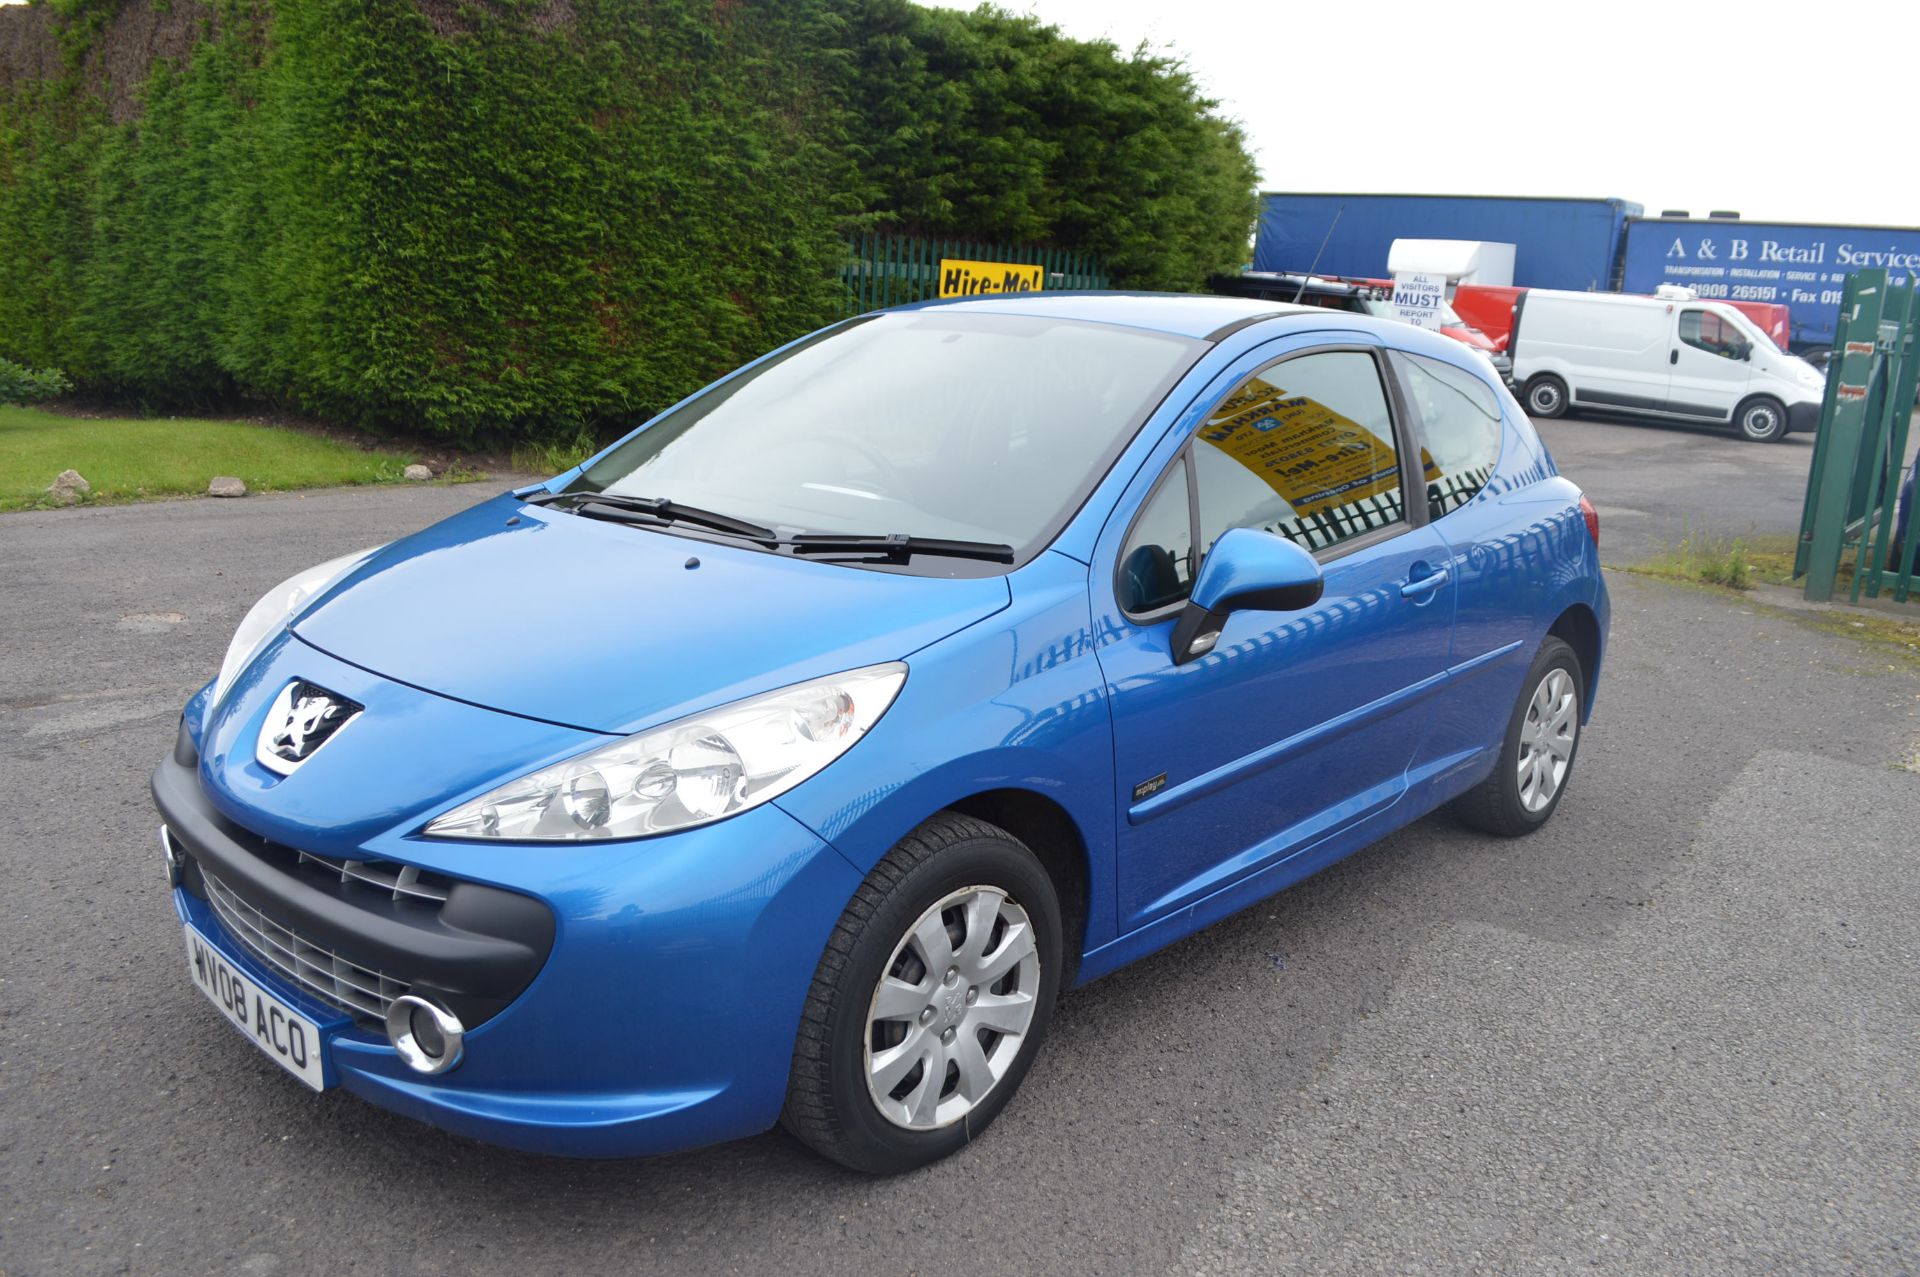 2008/08 REG PEUGEOT 207 M:PLAY, AIR CON, LONG MOT* WITH VALUER'S REPORT* - Image 3 of 16